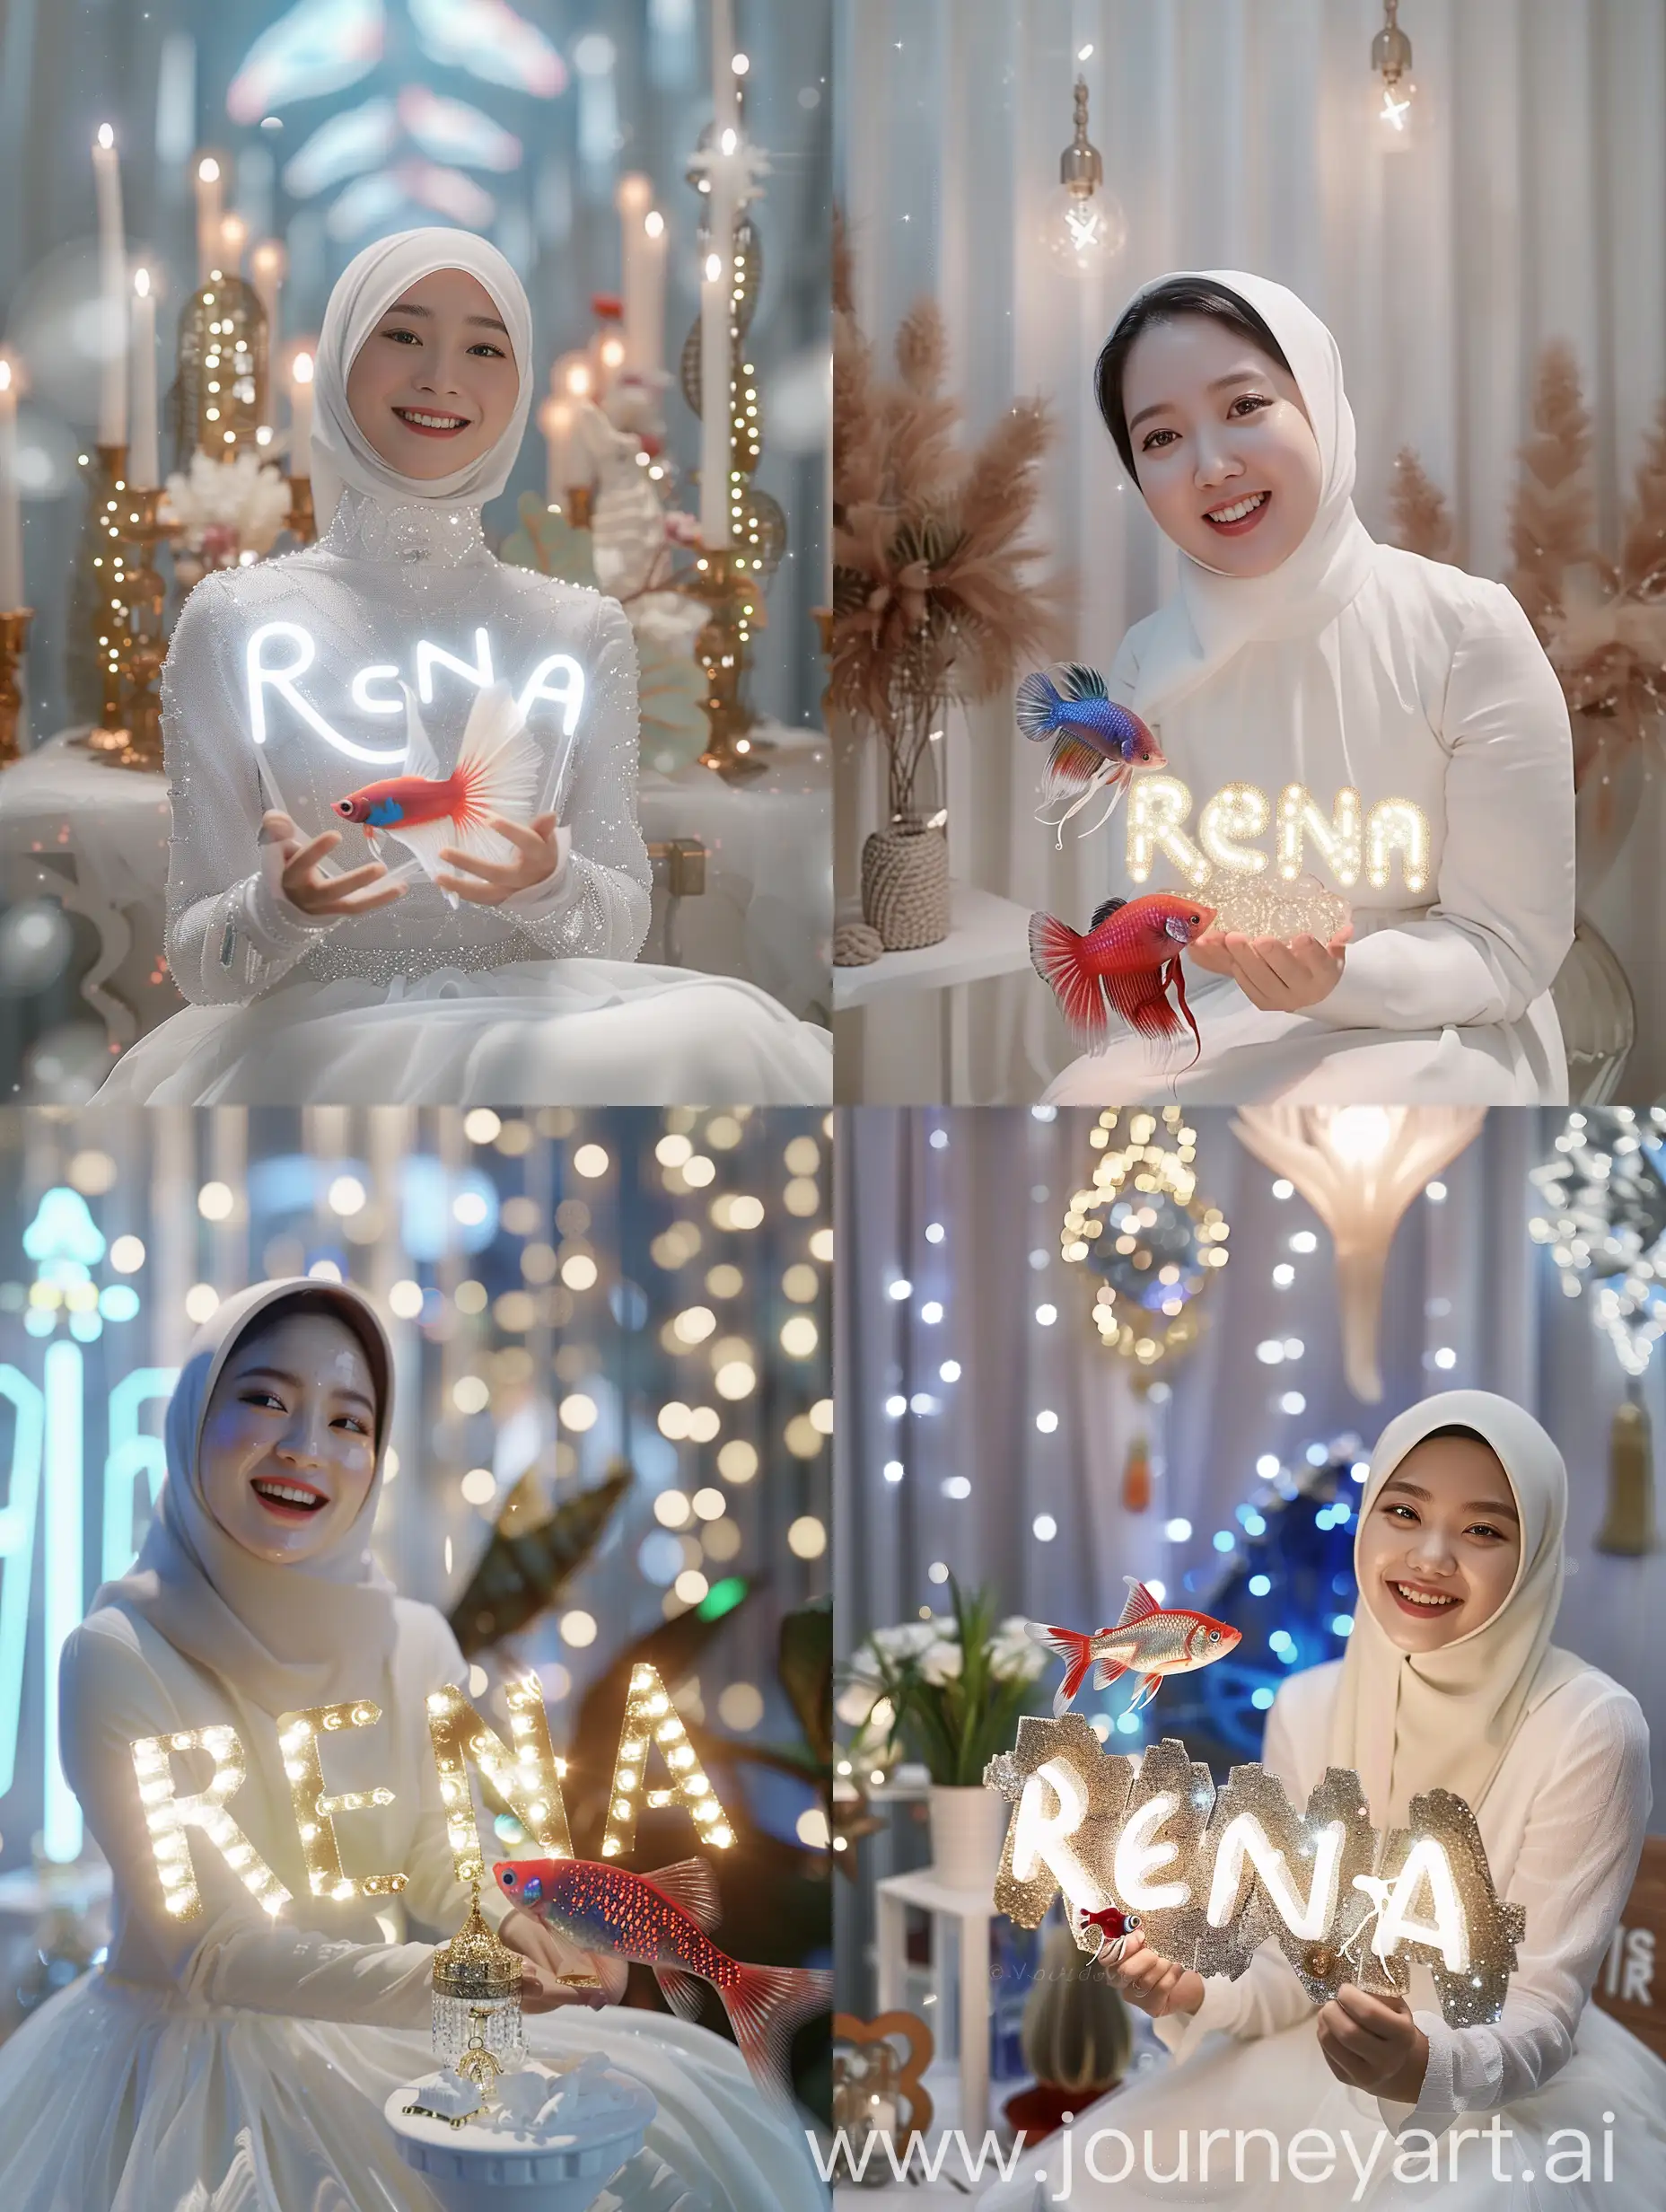 super ultra hyper extreme amazing detailed and realistic crystal text name that says very detailed "RENA" lights up with white bias gold crome water that says "RENA", extreme fractal, mirroring effect photography very clouse up korean beautiful hijab woman smile white dress sitting a altar holding a miniature red blue white betafish with long tailed. 4k UHD